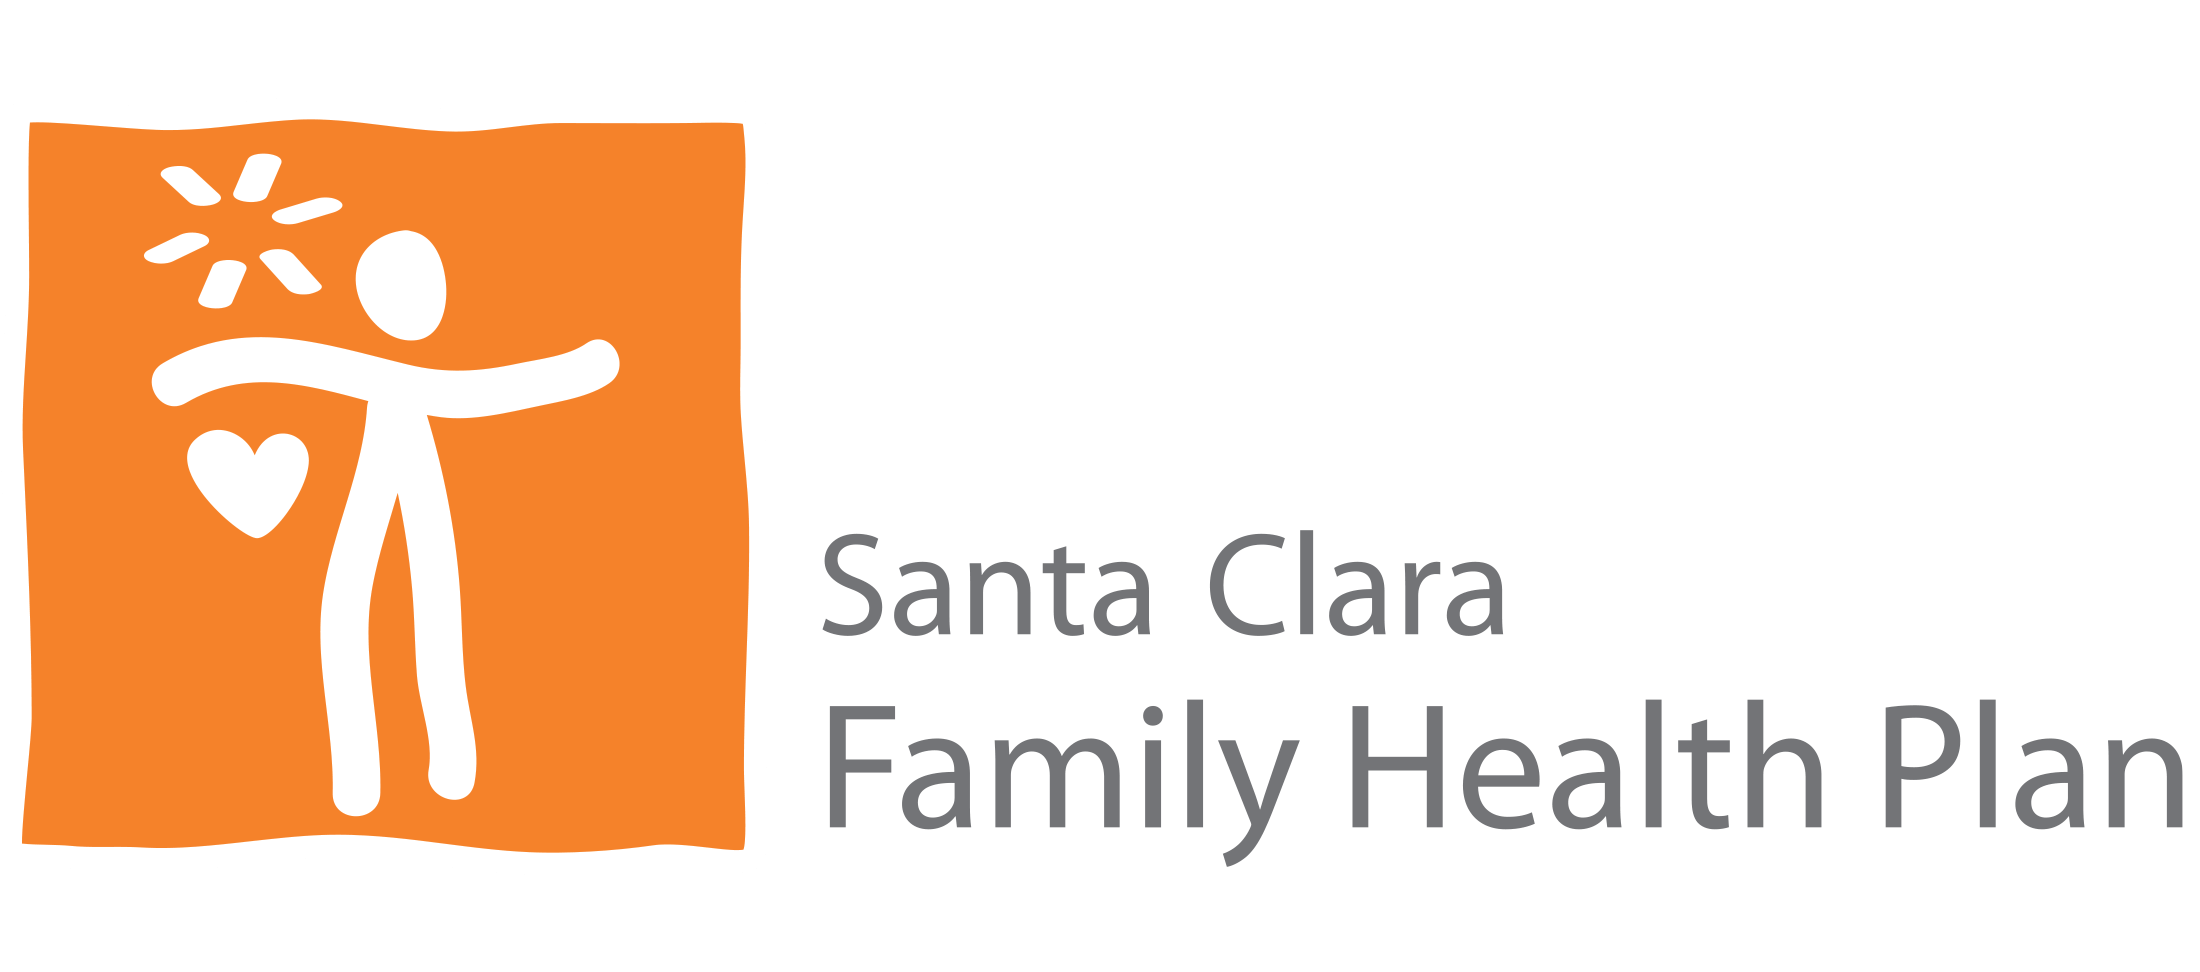 Santa Clara Family Health Plan Chooses Healthx Mobile Engagement Suite to Engage and Activate Their Members